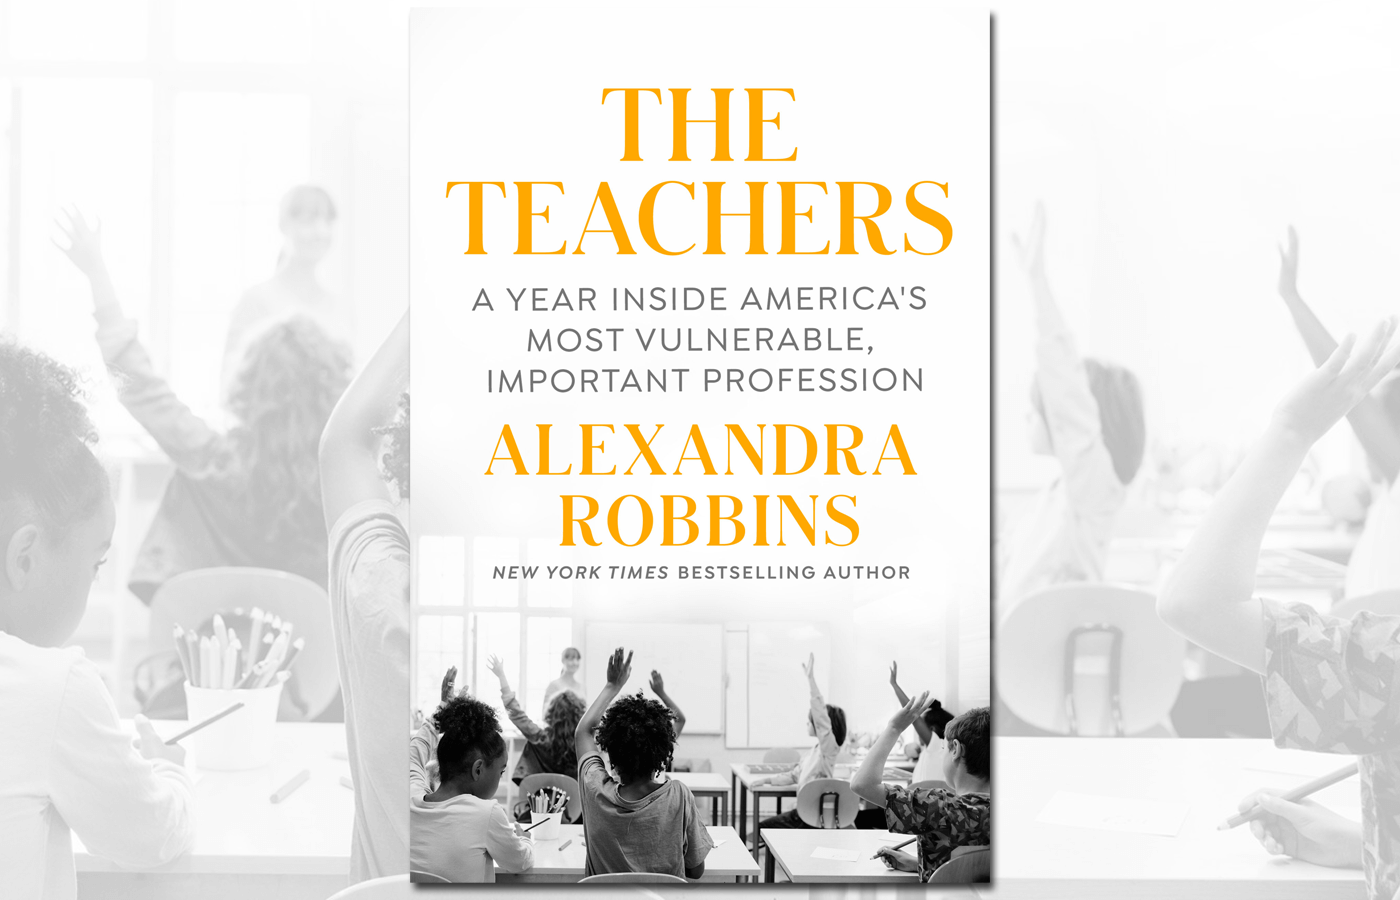 Book cover of "The Teachers: A Year Inside America’s Most Vulnerable, Important Profession"